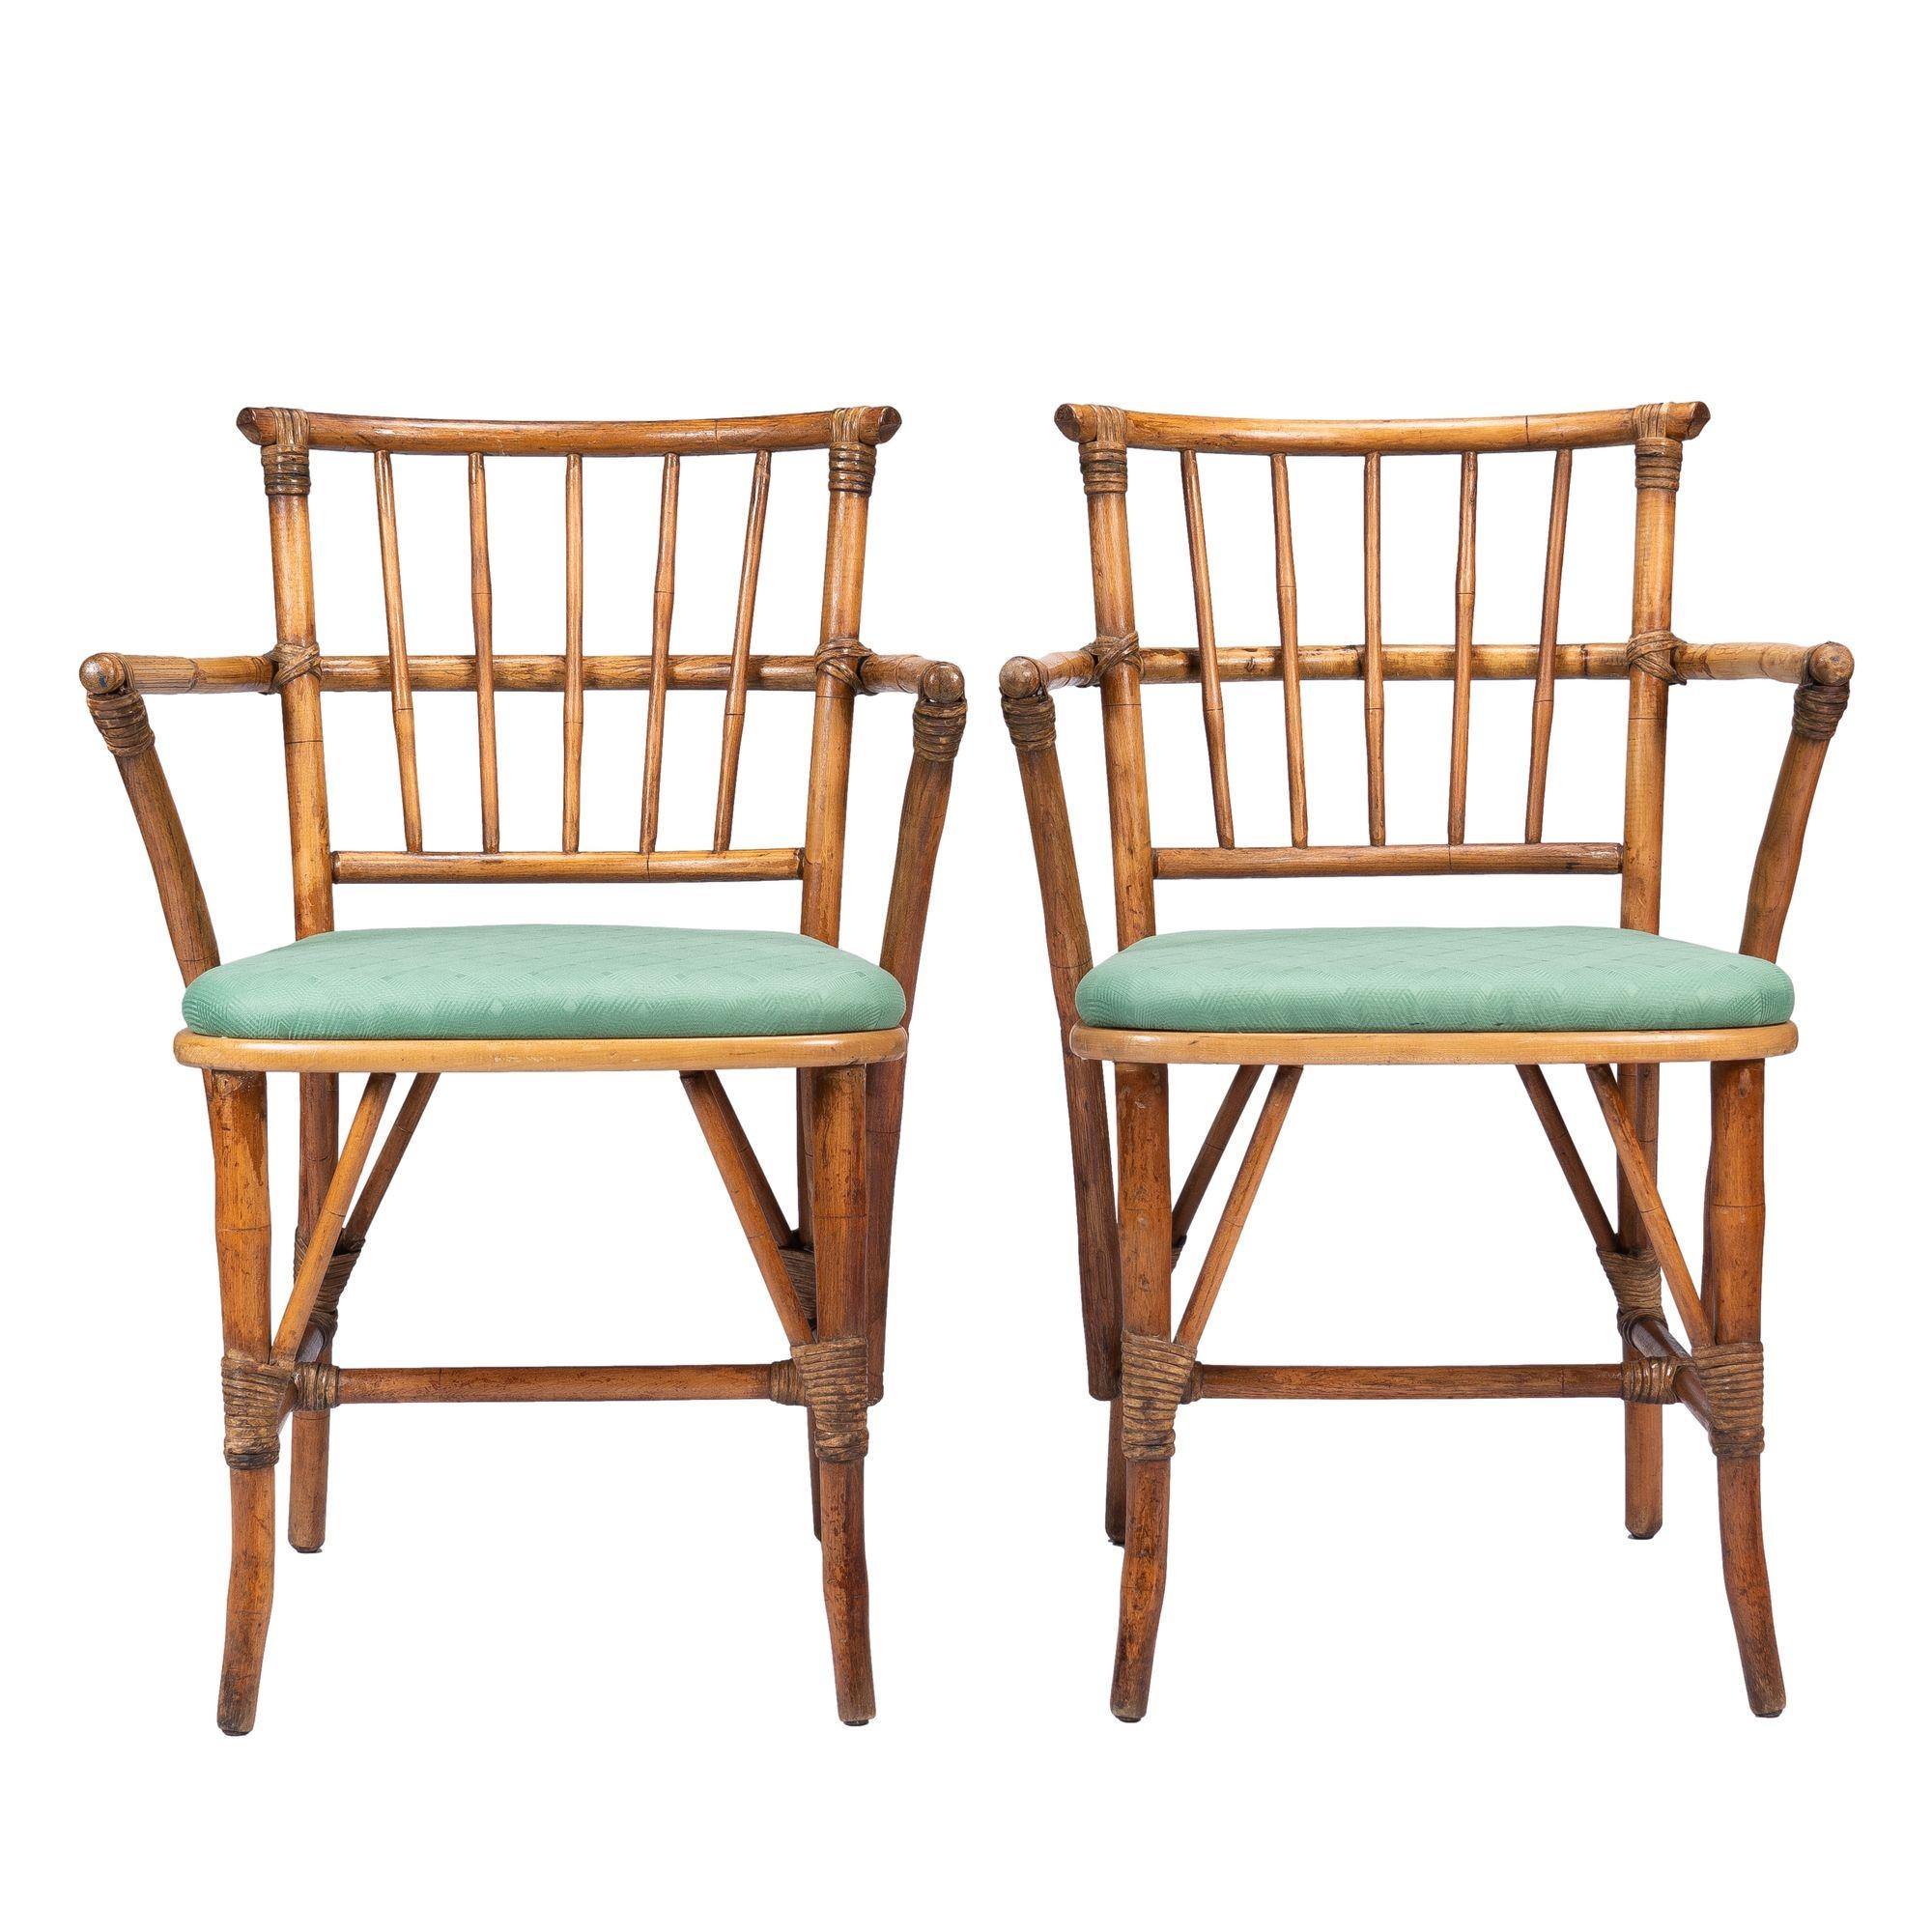 Pair of vintage bamboo turned hardwood arm chairs joined with bamboo lashings and fitted with upholstered seats.
American, mid-20th century.

Dimensions: 22” W x 22-1/2” D x 33” H
19-1/2” (seat height)
15” (rear seat width)
17-1/2” (seat